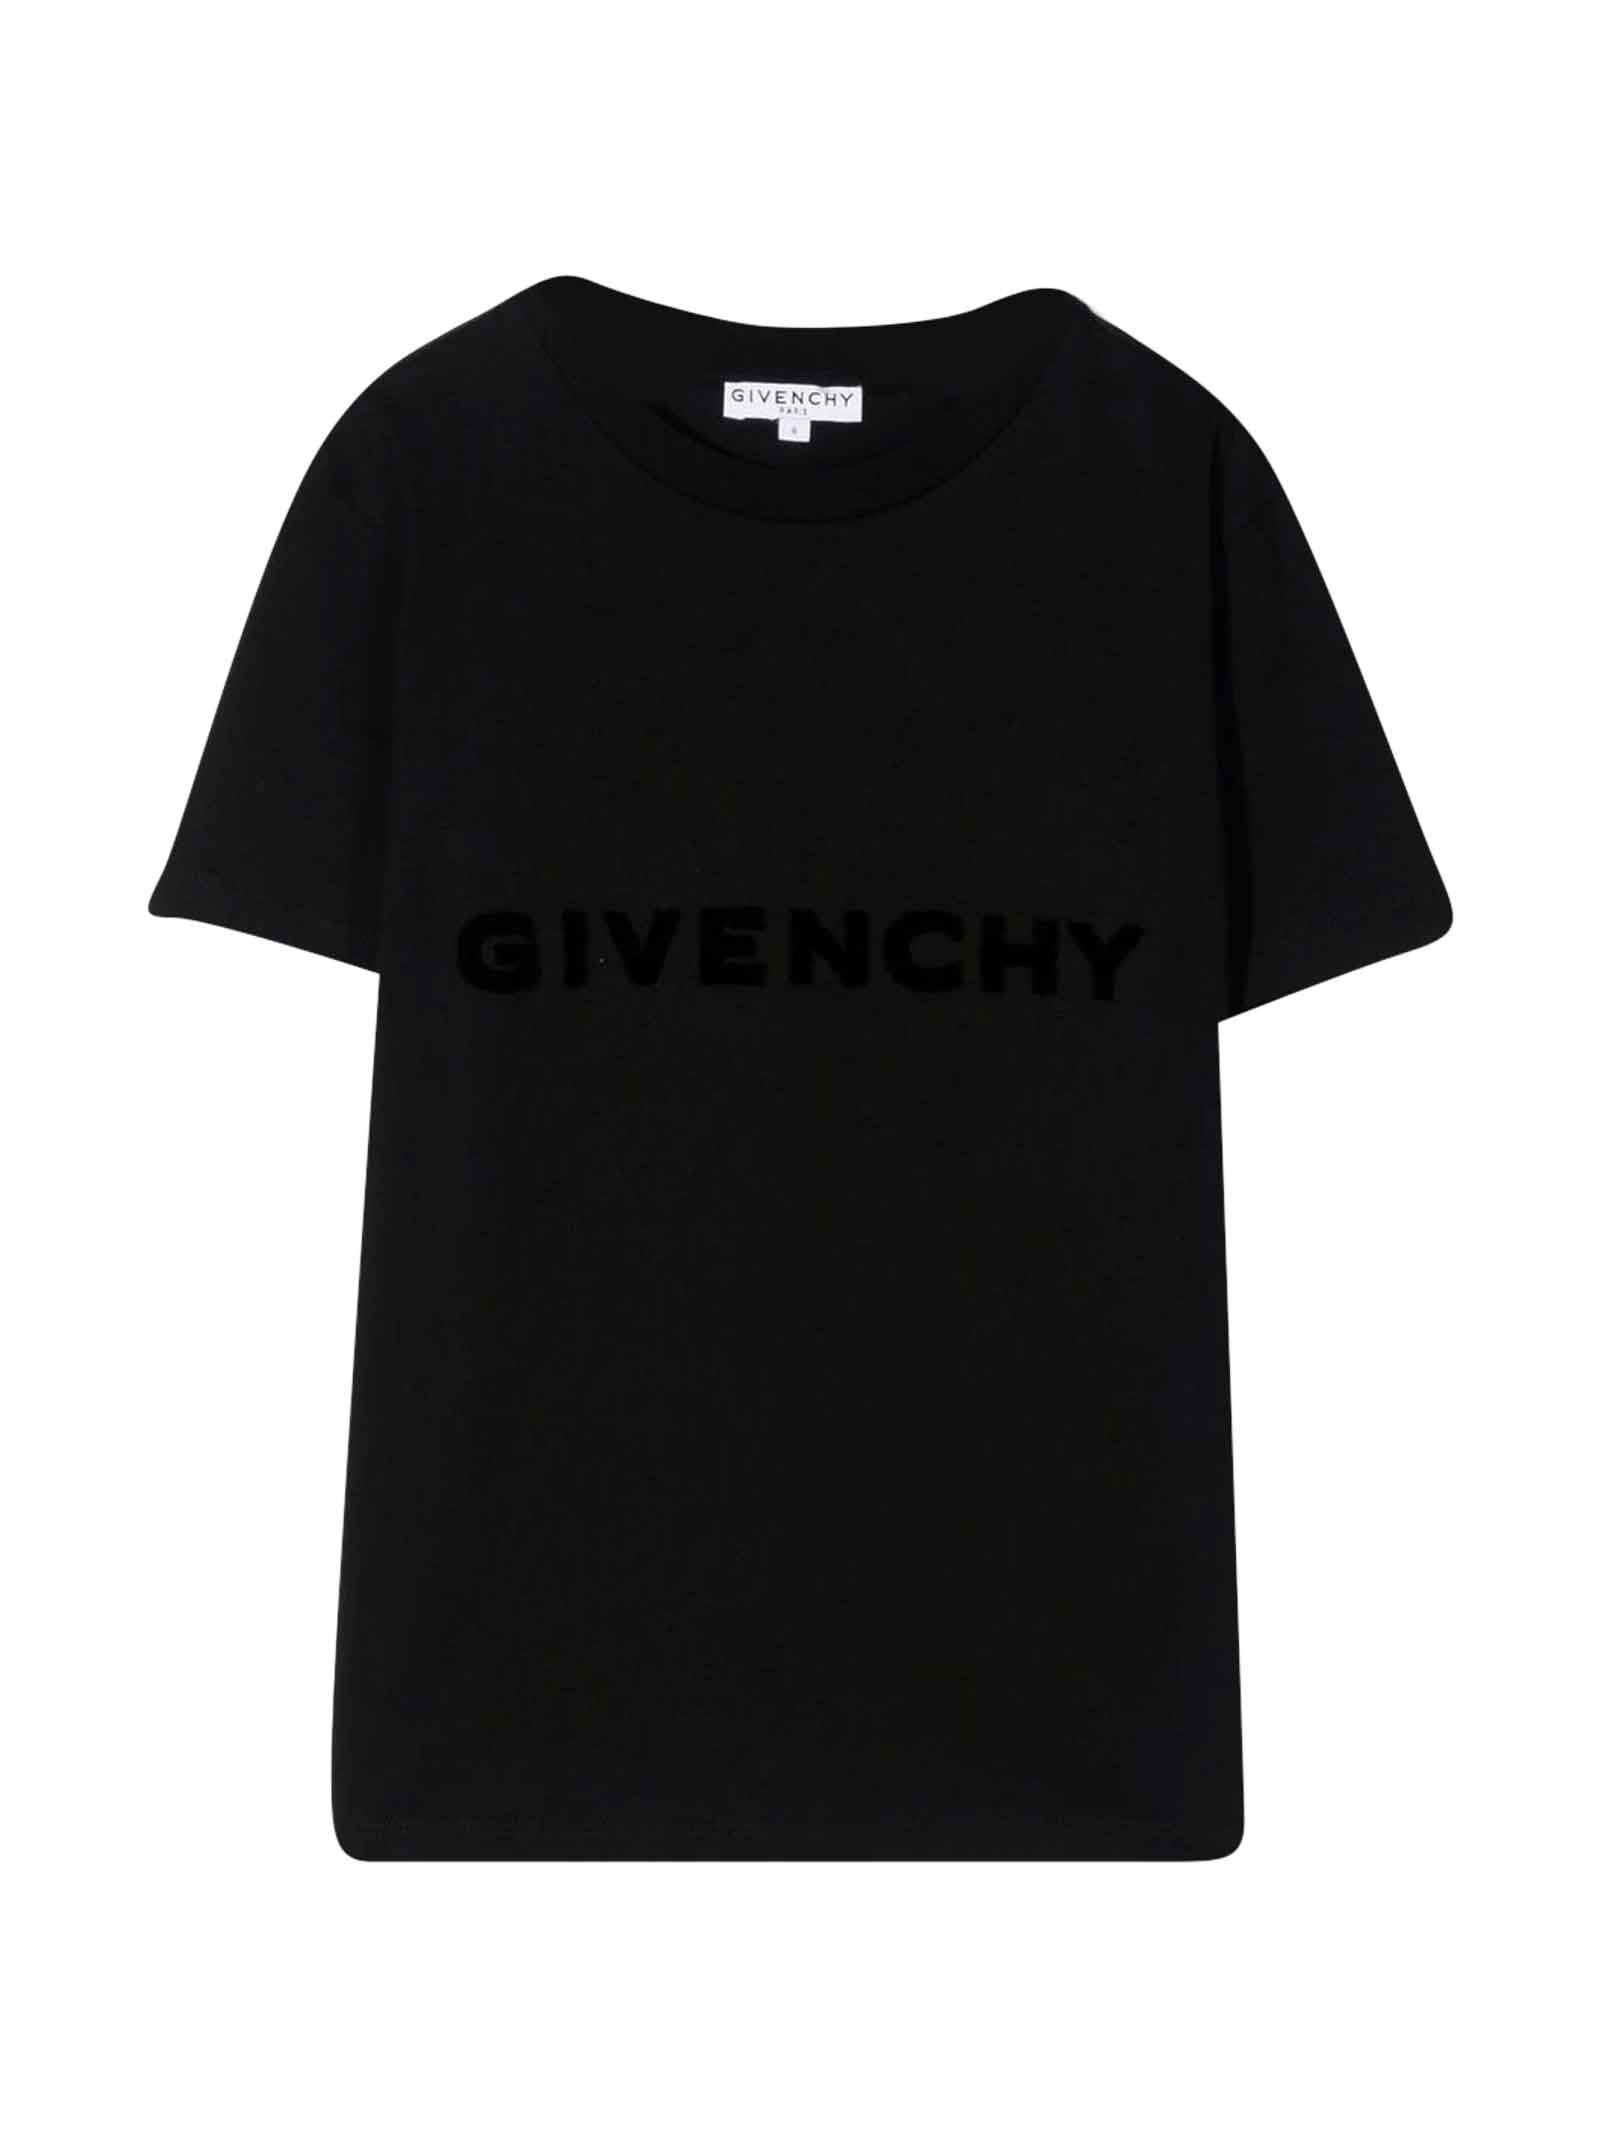 Givenchy Boy T-shirt From Embroidered .3d Details, Distinctive 4g Motif, Round Neckline, Short Sleeves And Straight Hem.